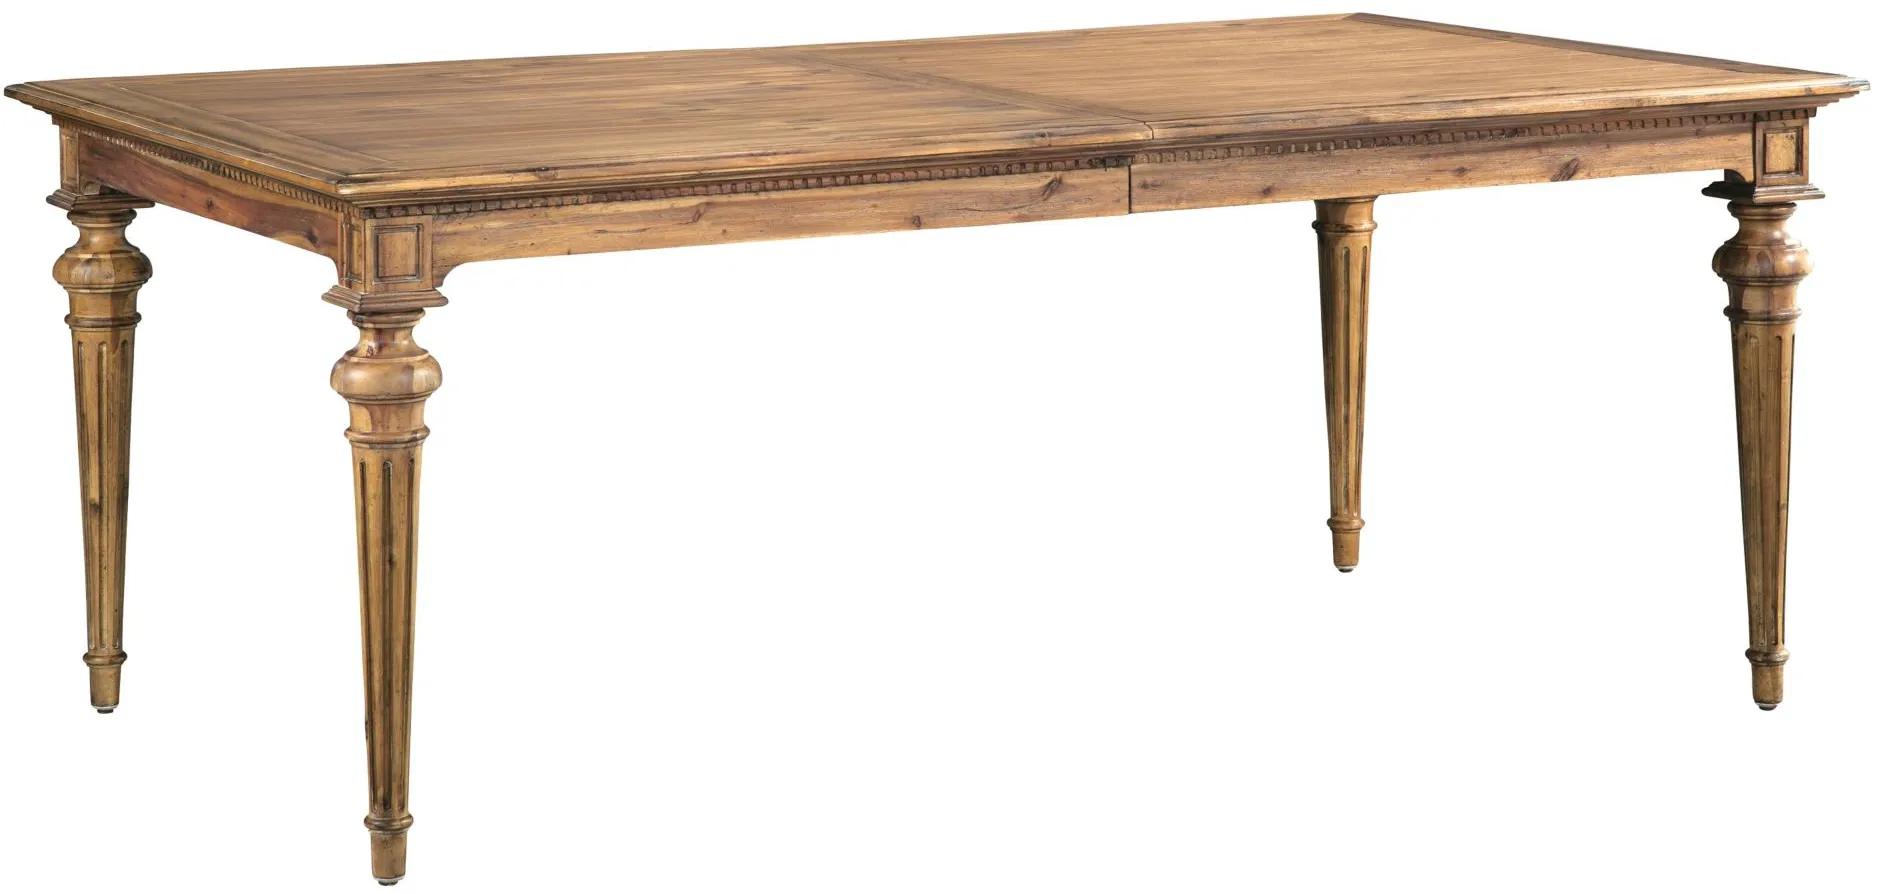 Wellington Hall Rectangular Dining Table in WELLINGTON NATURAL by Hekman Furniture Company